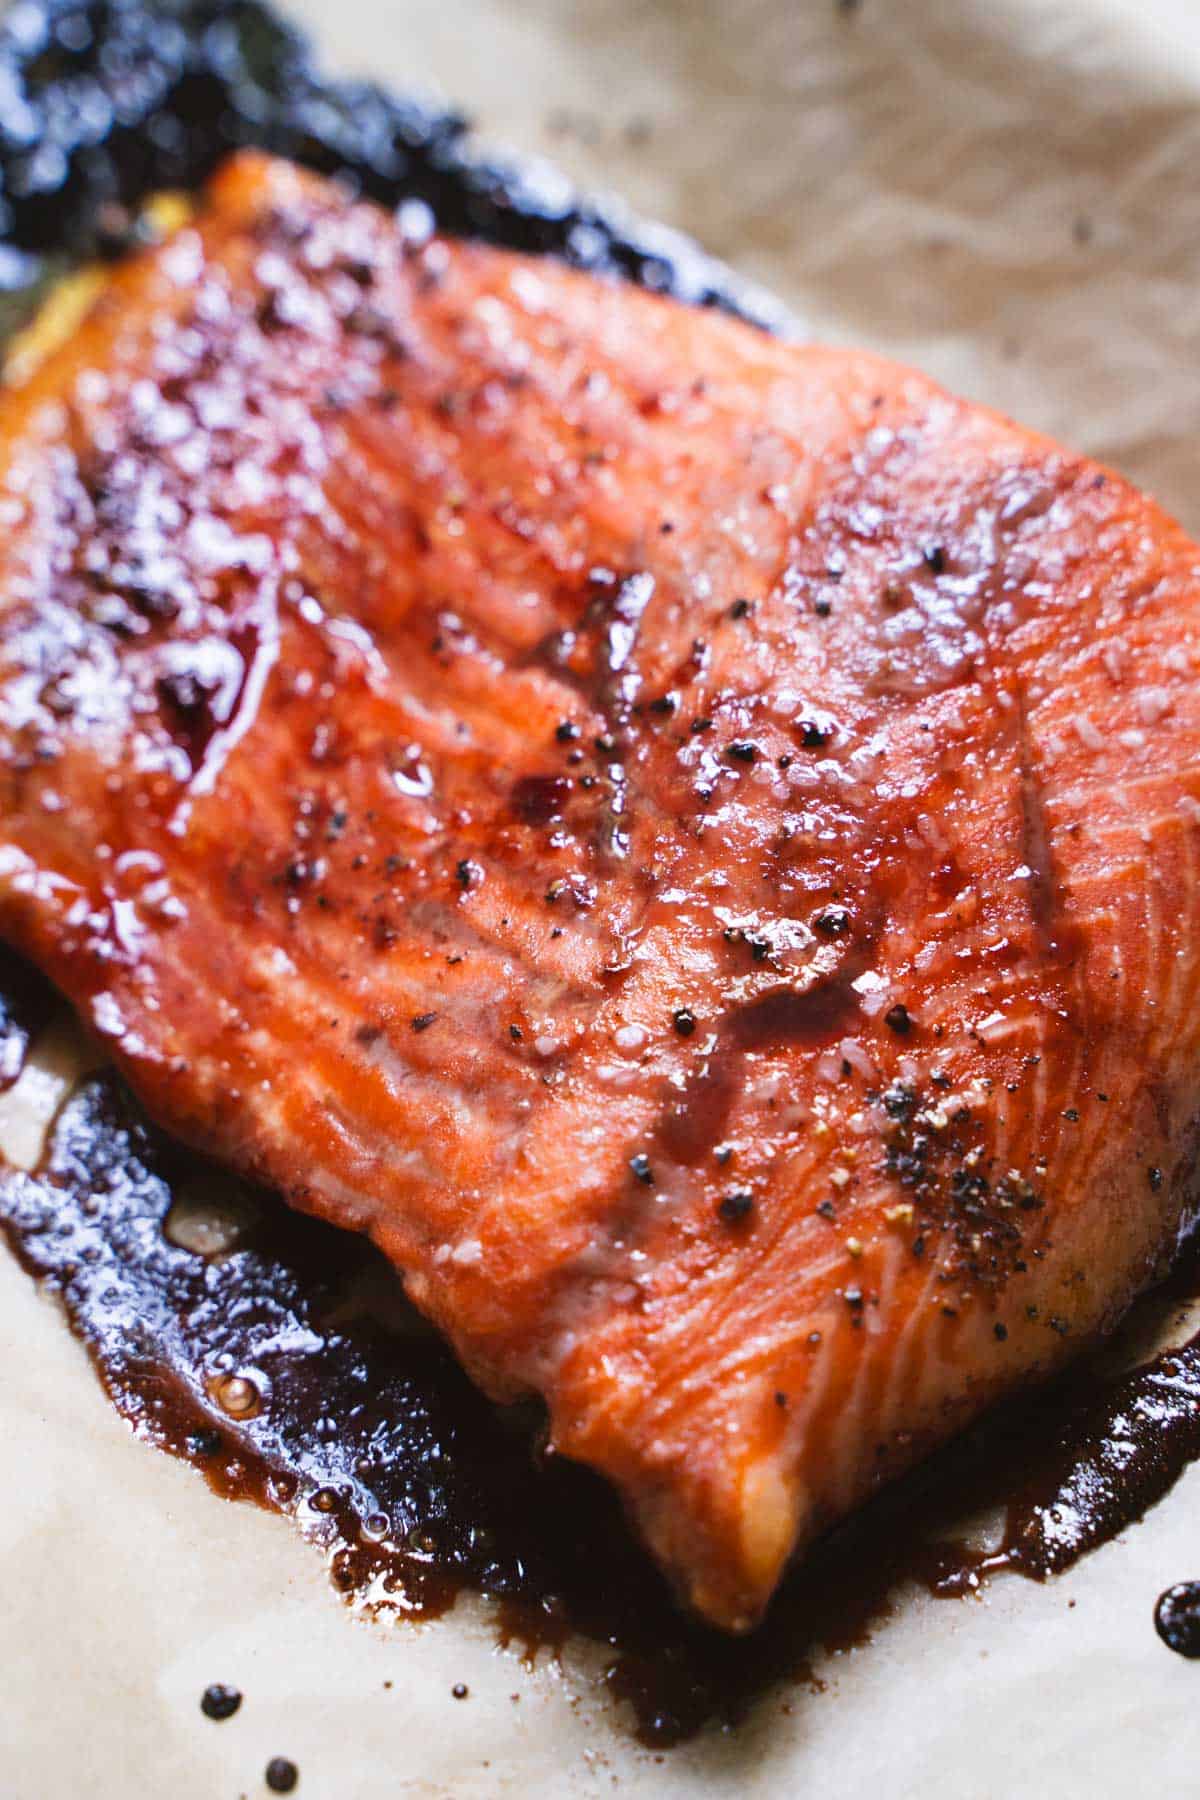 Baked salmon with cherry glaze on parchment paper